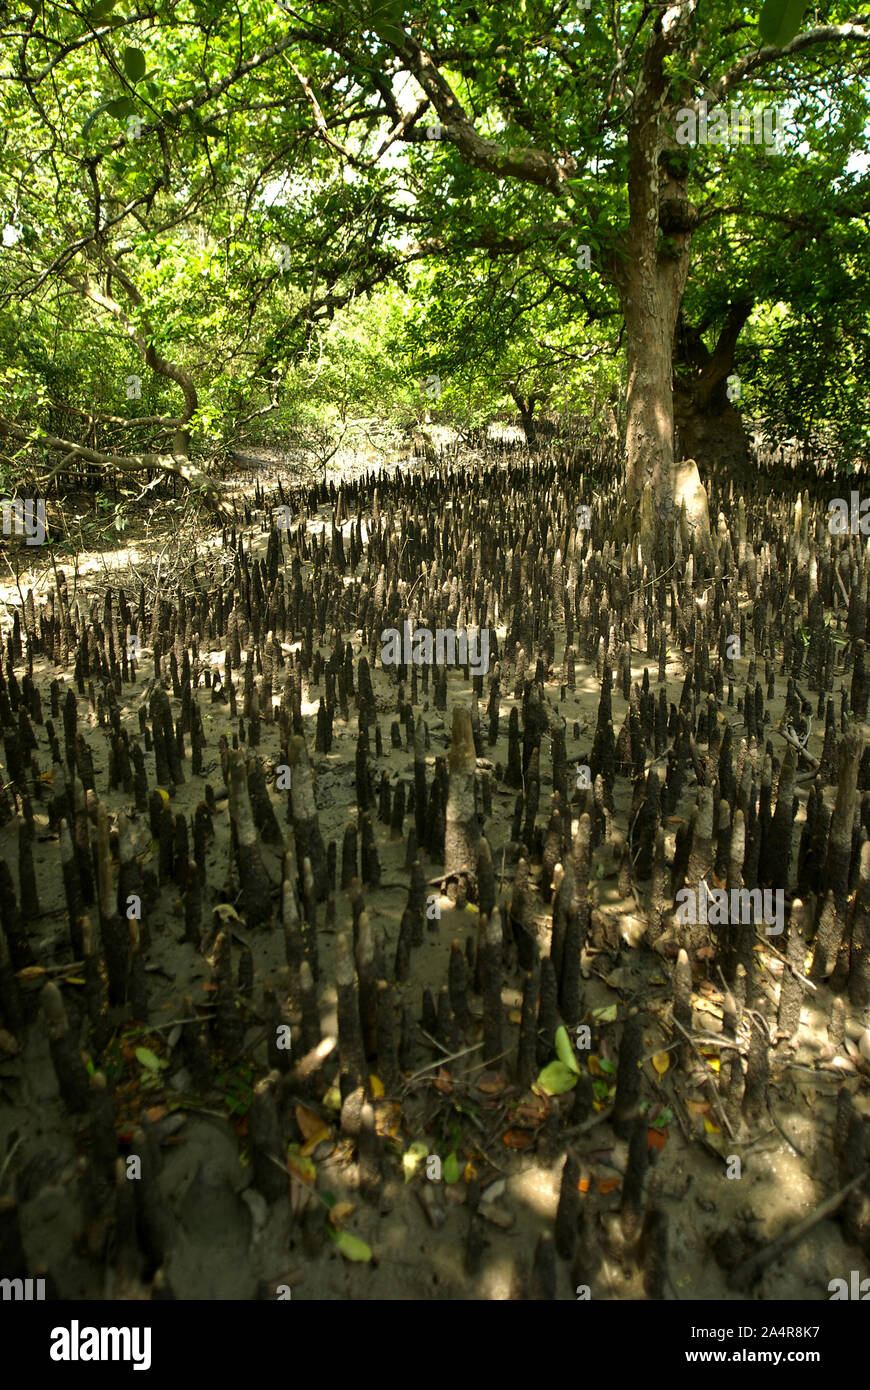 Aerial roots (pneumatophores) of mangrove trees, in the Sundarbans, Khulna, Bangladesh. April 1, 2011. The name Sundarban, meaning beautiful forest, may have been derived from the dominance of the mangrove species Heritiera fomes, locally known as Sundari (beautiful) tree because of its elegance. A UNESCO World Heritage Site, it is the largest mangrove forest in the world with an area of about 10,000 square kilometers, 60% of which lies in Bangladesh and the rest in West Bengal, India. The Sundarbans is home to the Royal Bengal Tiger and provides a unique ecosystem and series of habitats for a Stock Photo